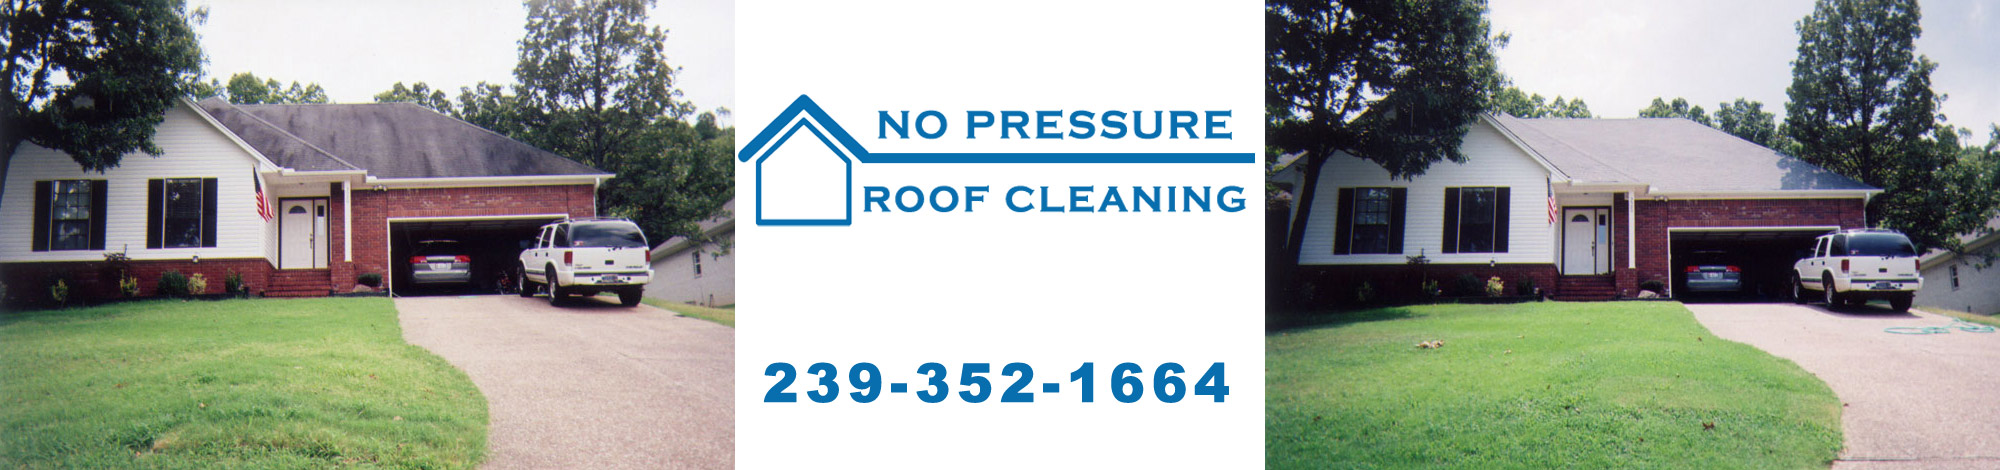 no pressure roof cleaning red brick house